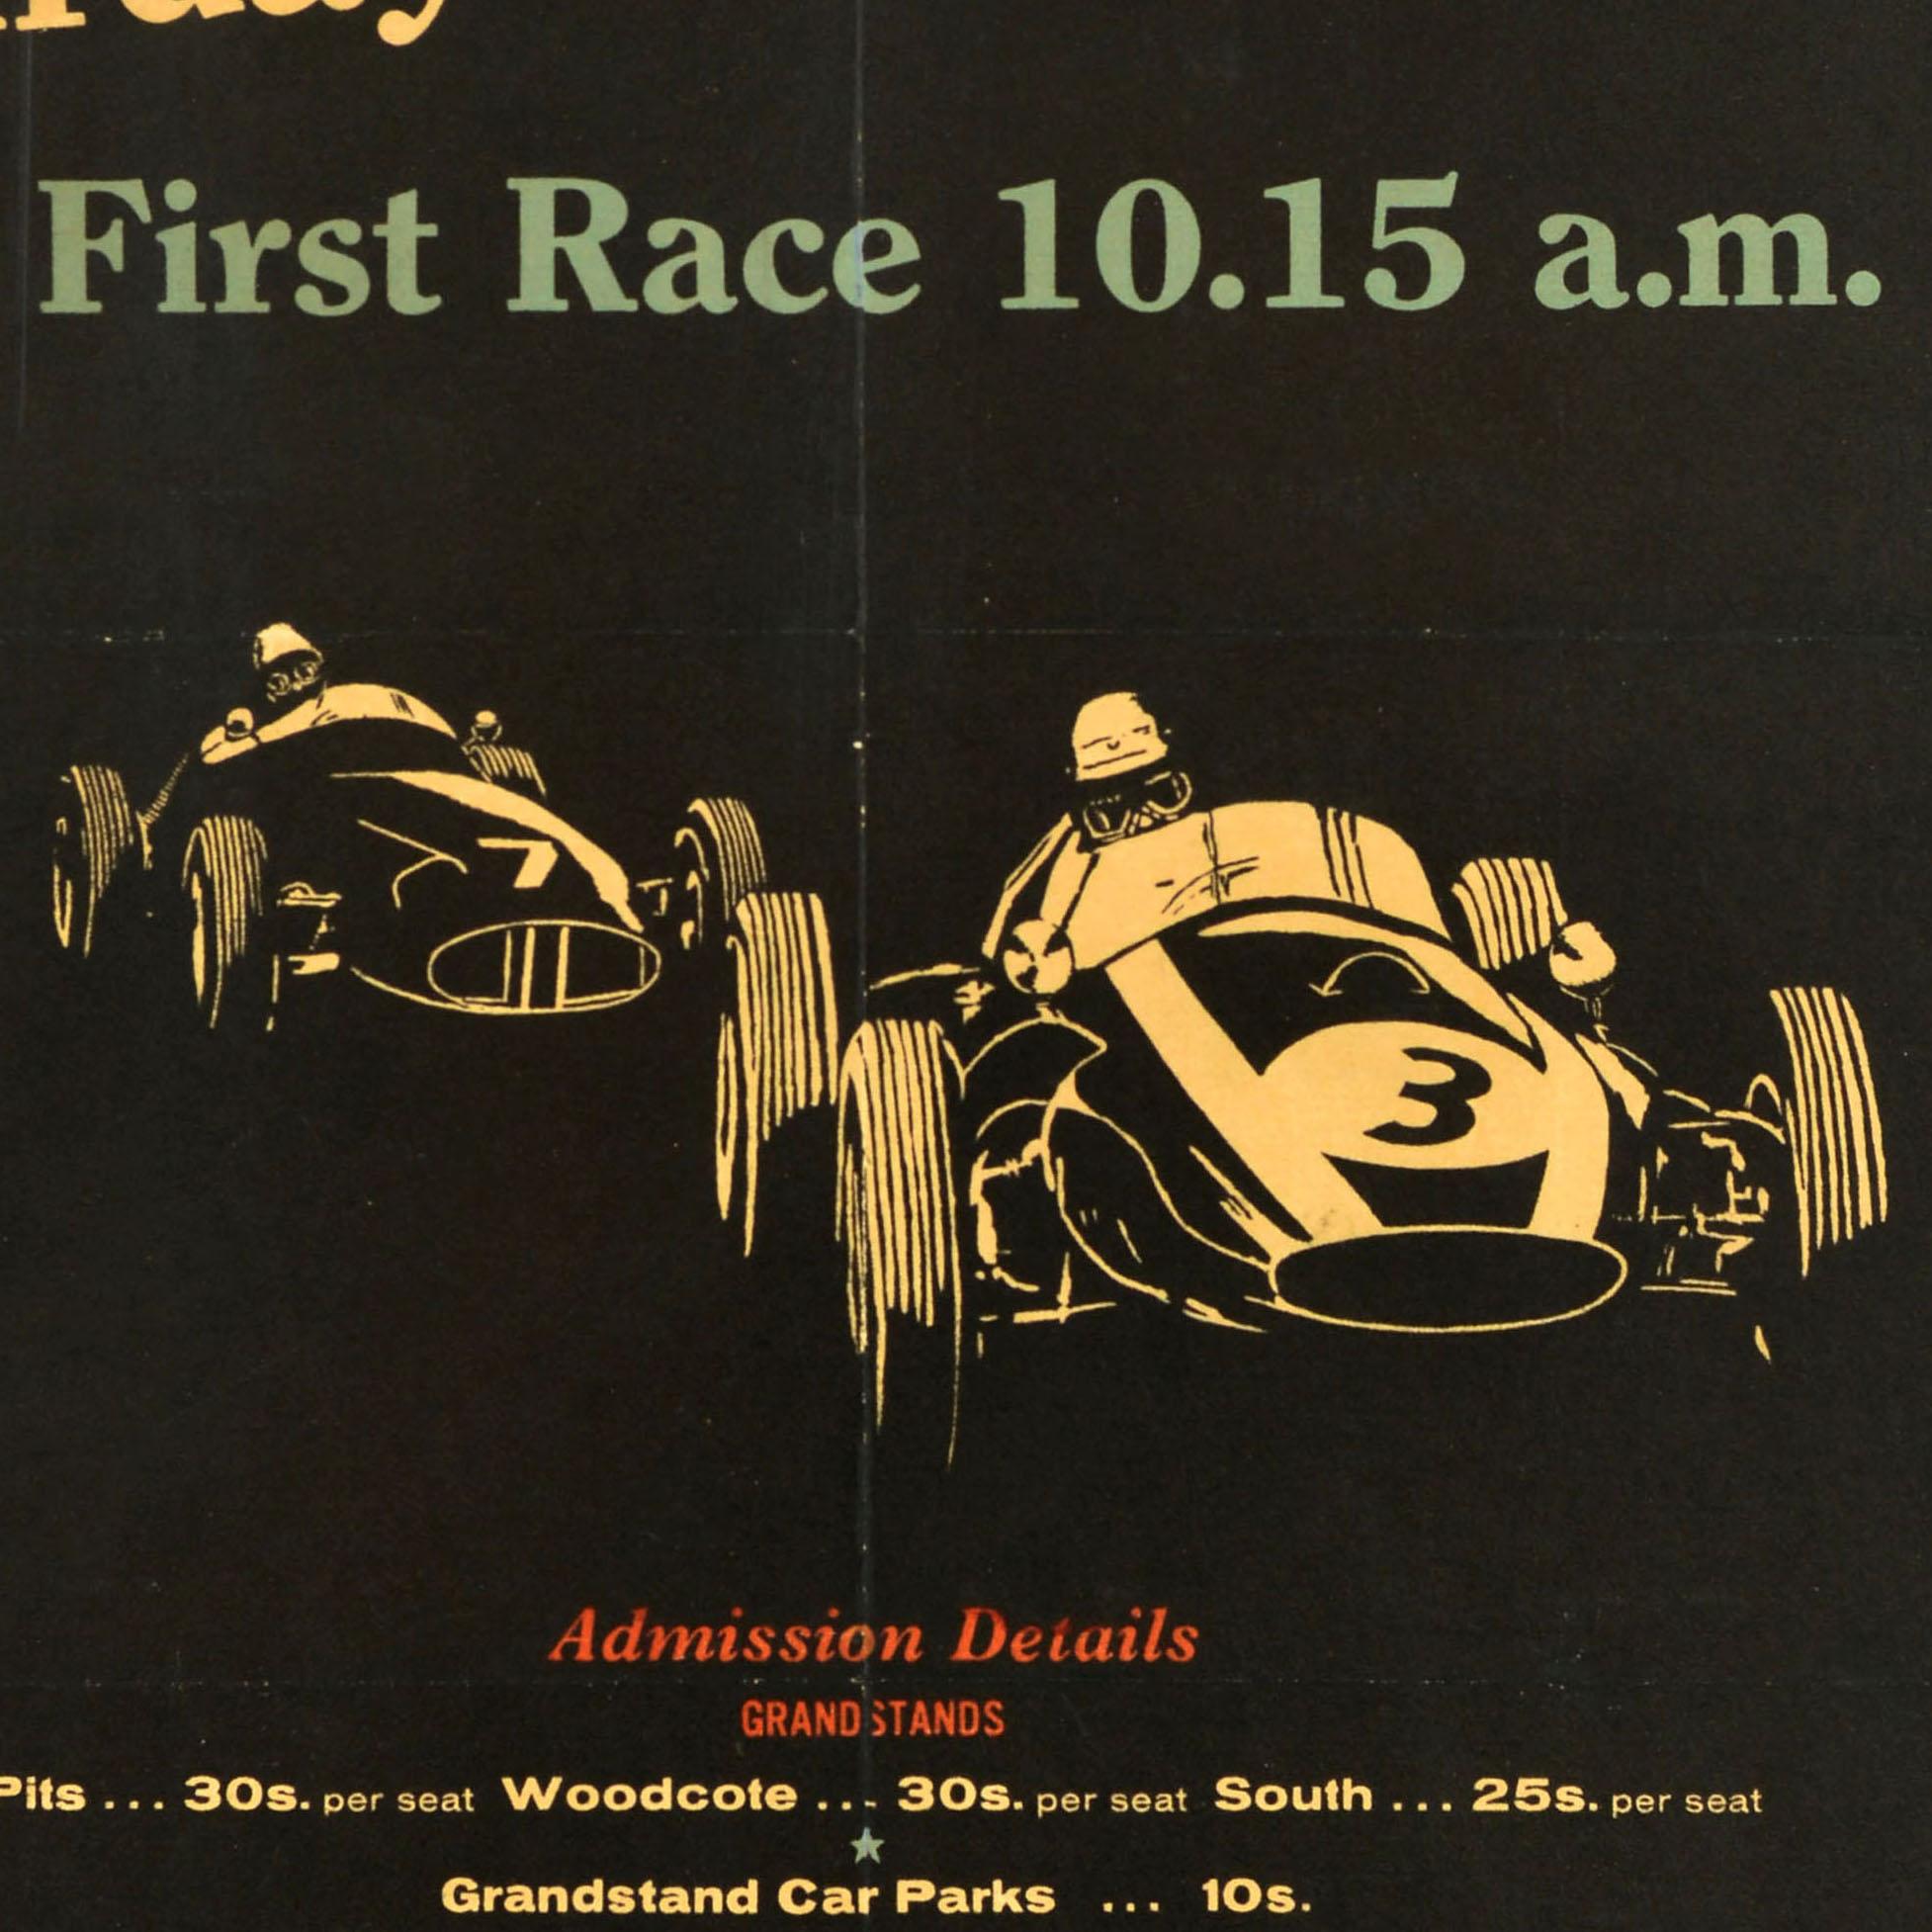 Original vintage Formula One motorsport poster issued by the British Racing Drivers' Club (BRDC) for the 12th International Trophy Meeting held at Silverstone on 14 May 1960 featuring an image of drivers in two Classic racing cars numbered 3 and 7